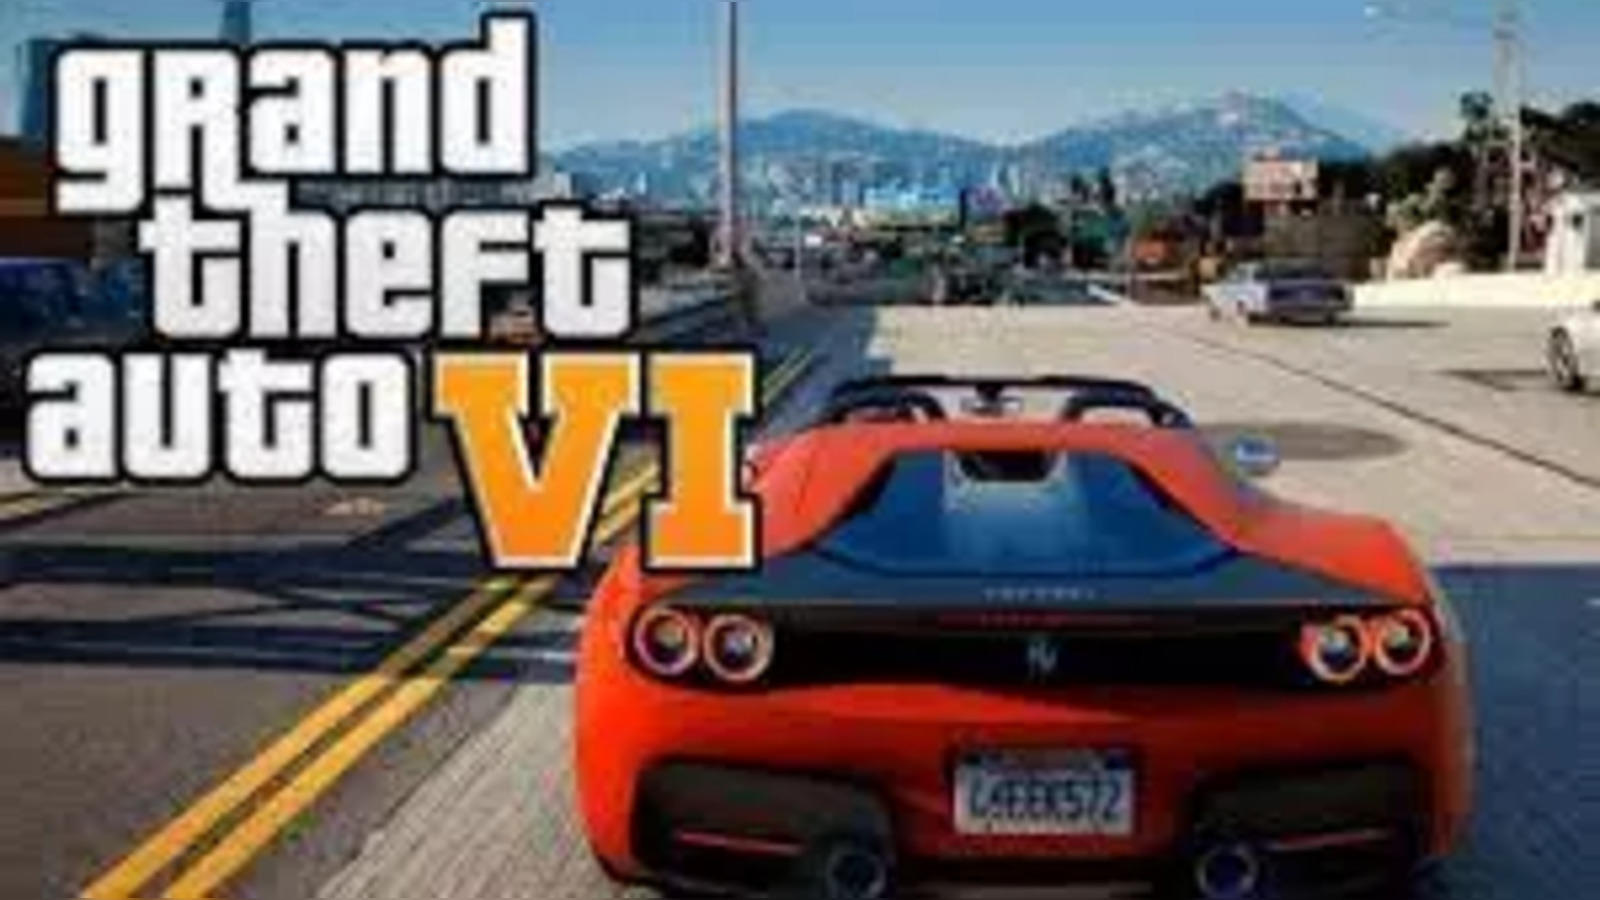 GTA 6 Leaks, Gameplay, Map, and More - News